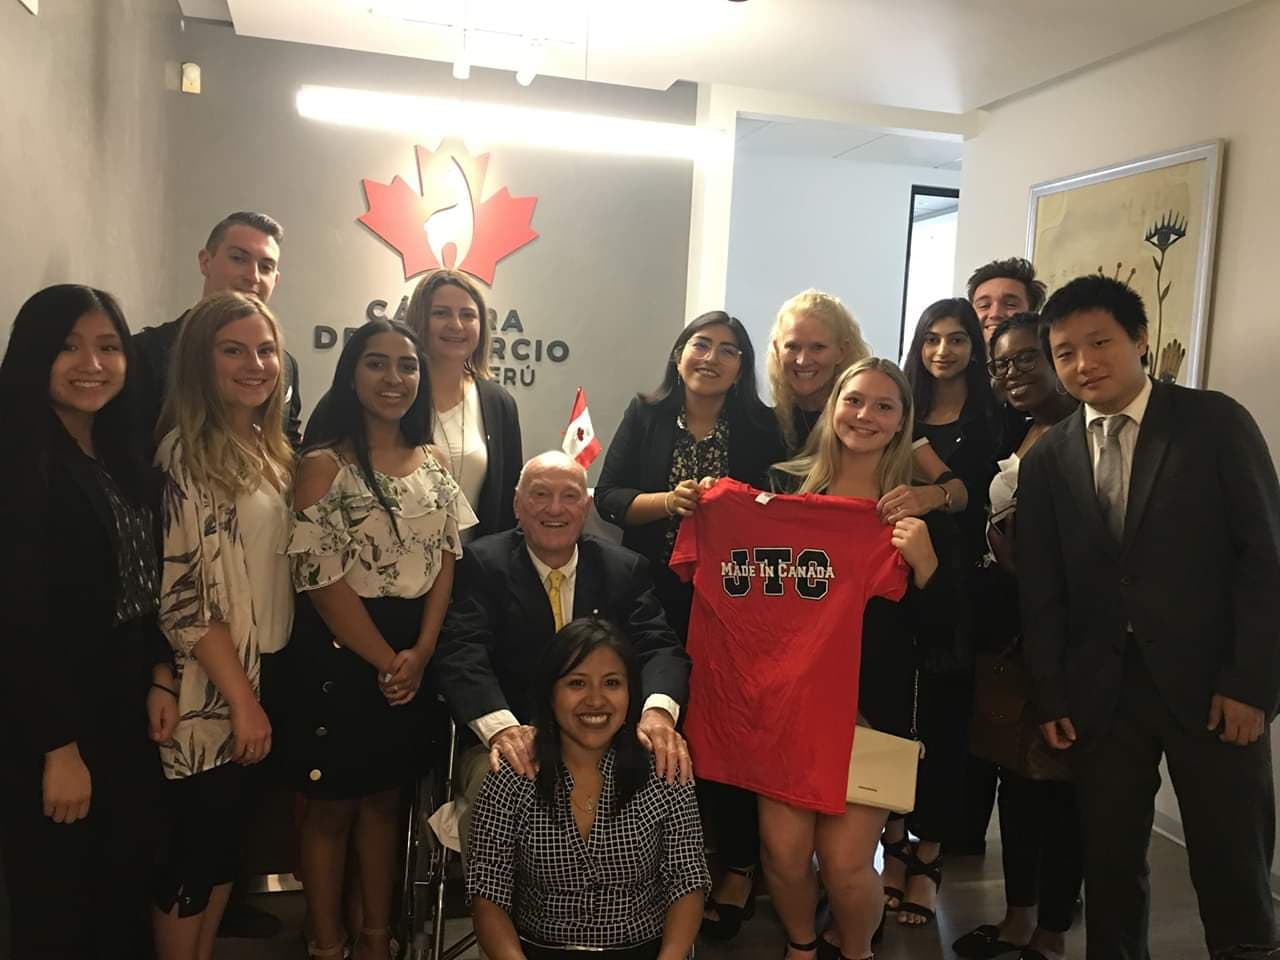 Dhillon and her fellow Junior Team Canada Ambassadors at the Canada/Peru Chamber of Commerce